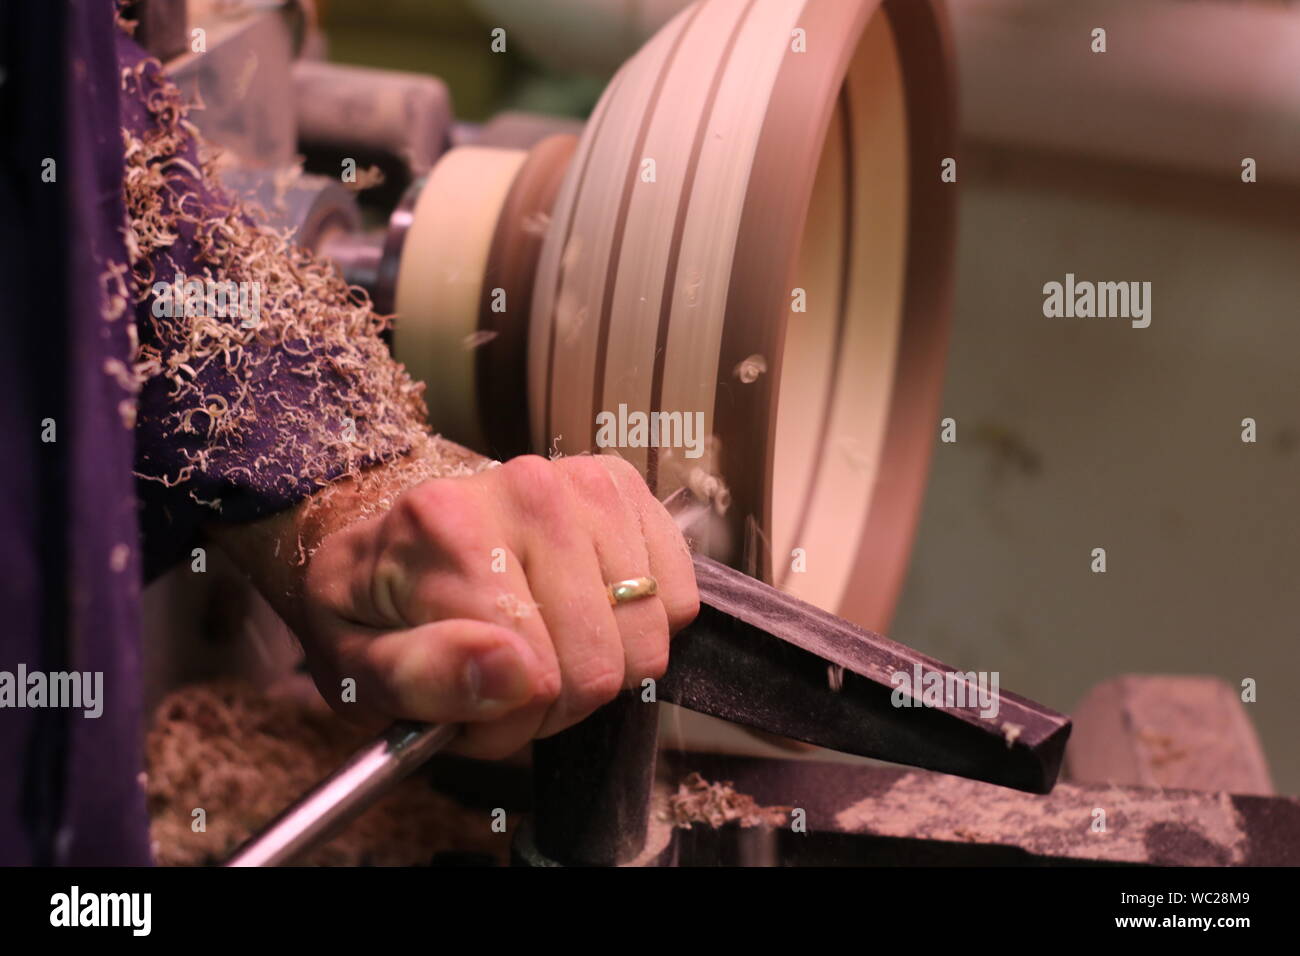 Woodworker at work, wood-turning a bowl on the lathe. Stock Photo